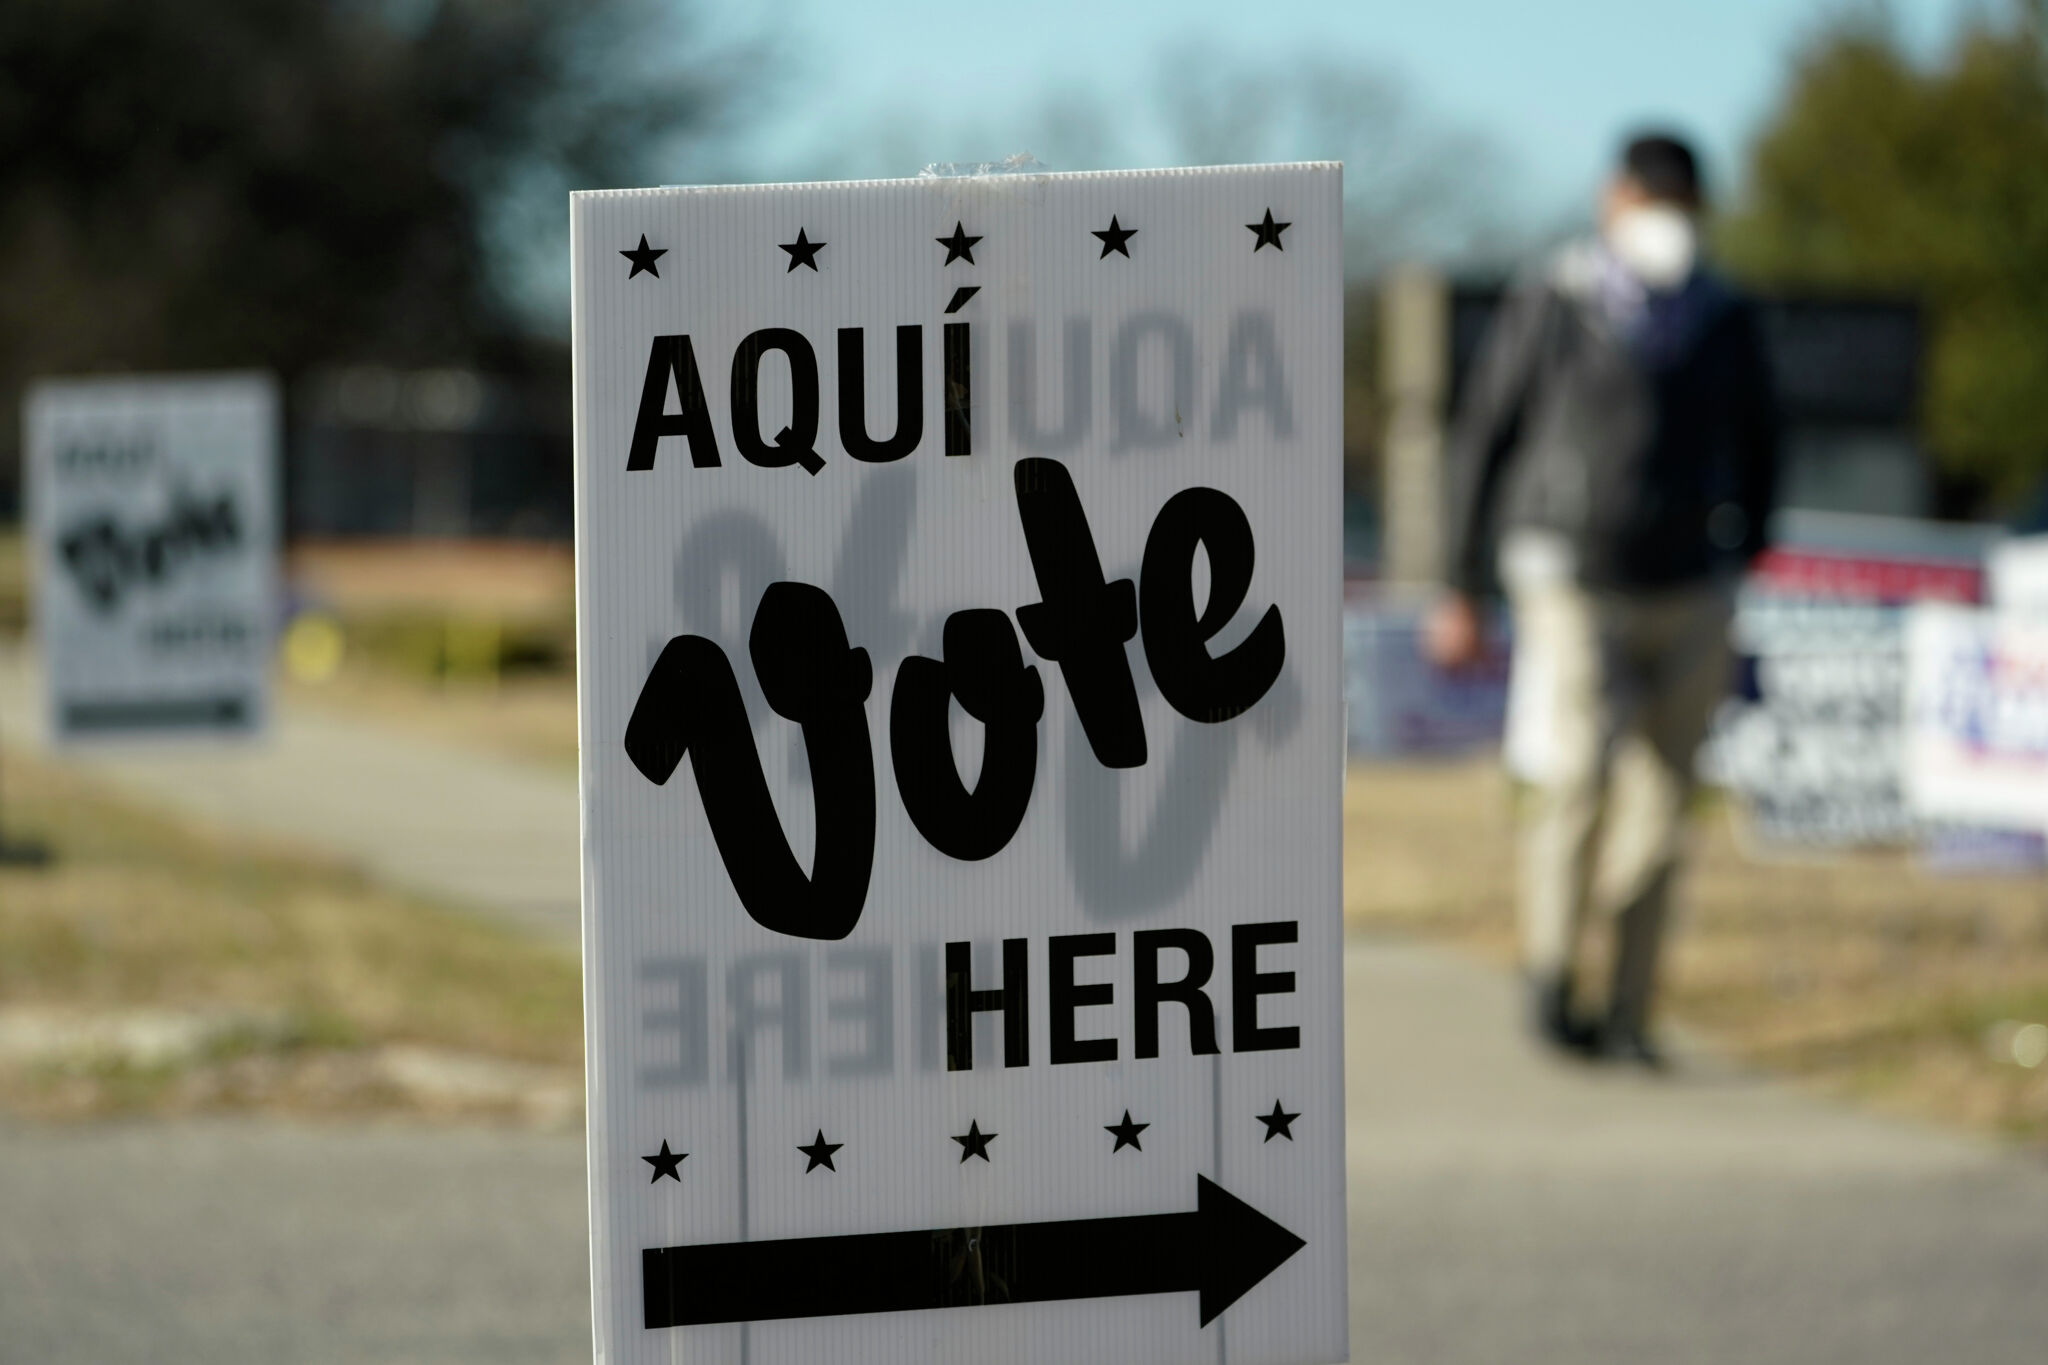 Early voting in San Antonio ends Friday for Texas primary. Here's what